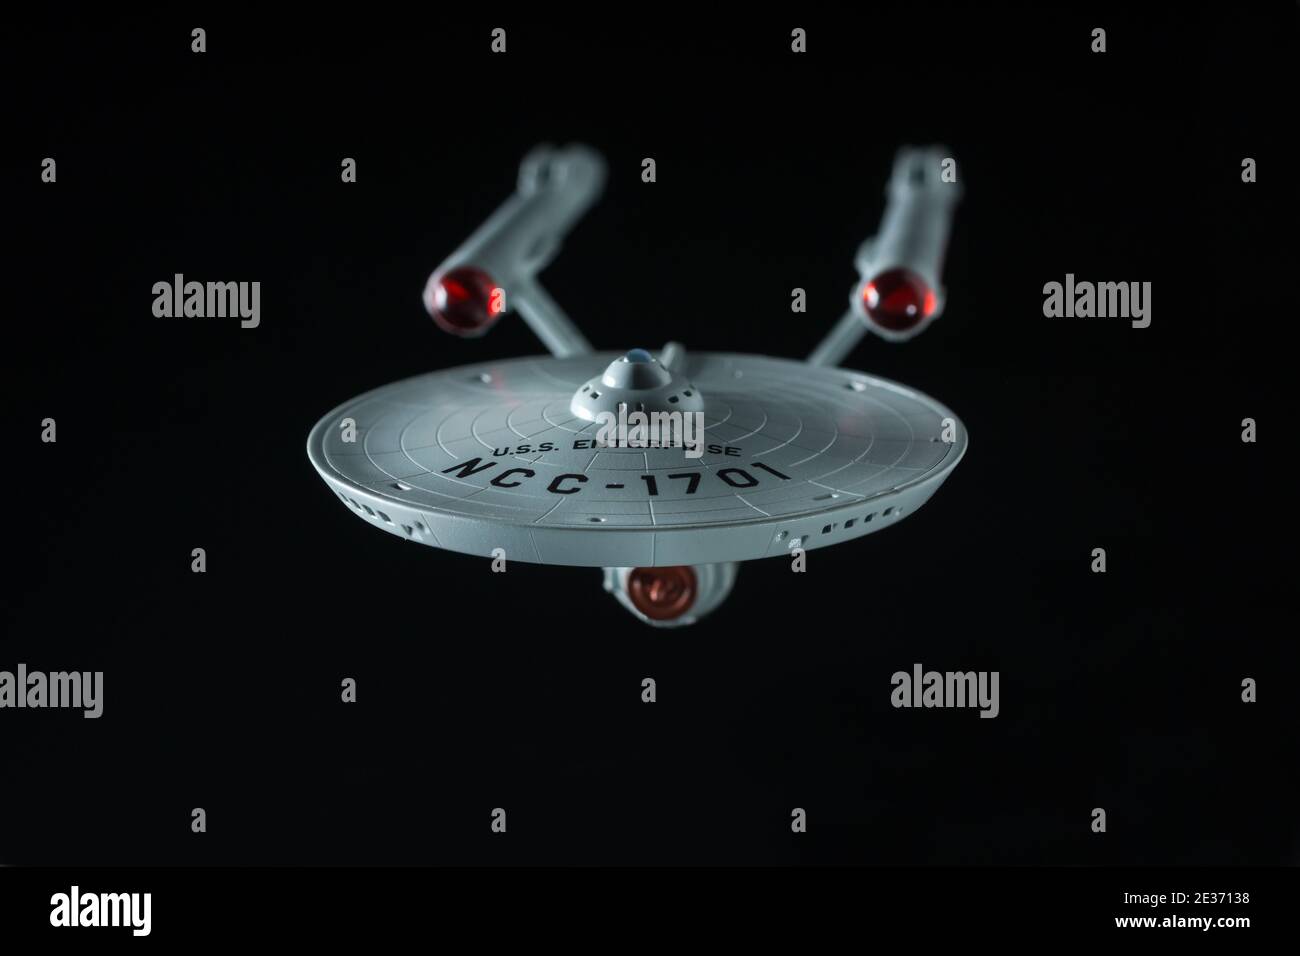 USS Enterprise model based on the space ship from the TV series Star Trek created by Gene Roddenberry on a black background Stock Photo